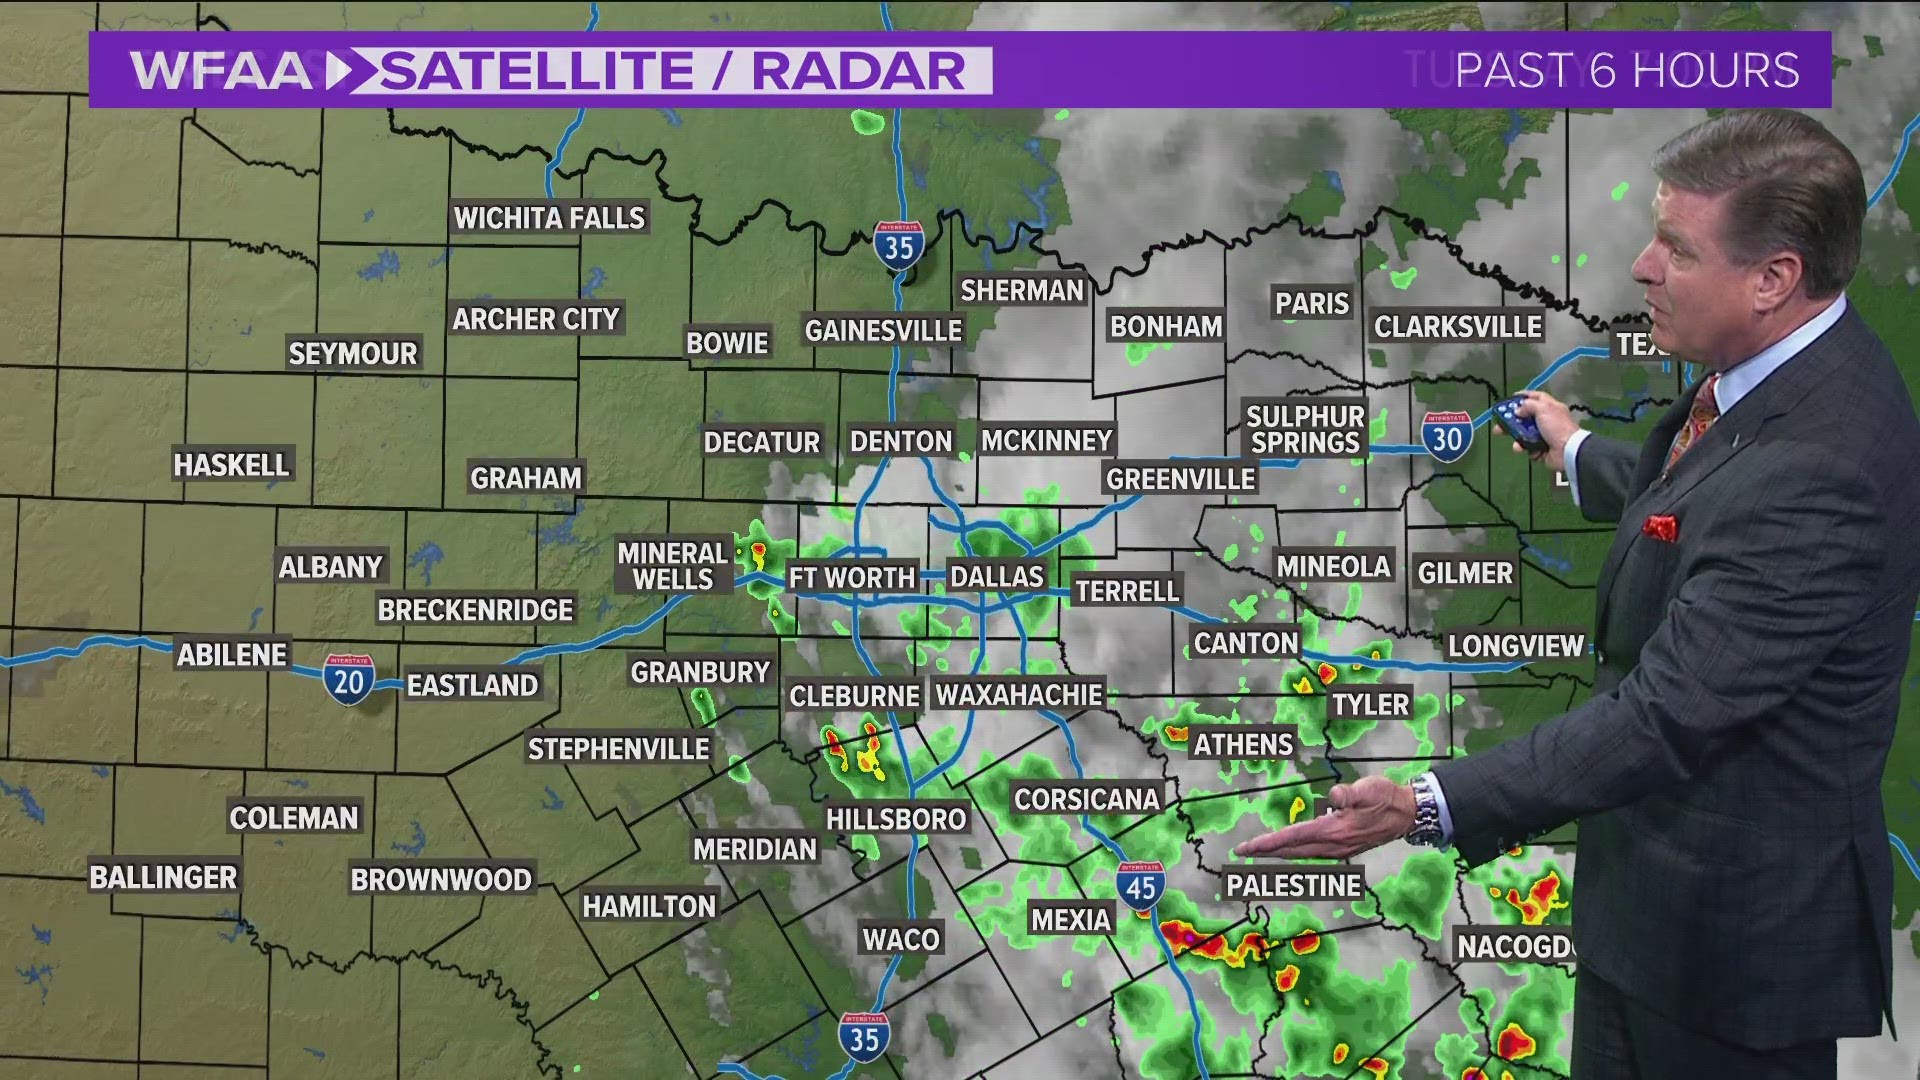 The North Texas area saw some storms pop up throughout the afternoon.